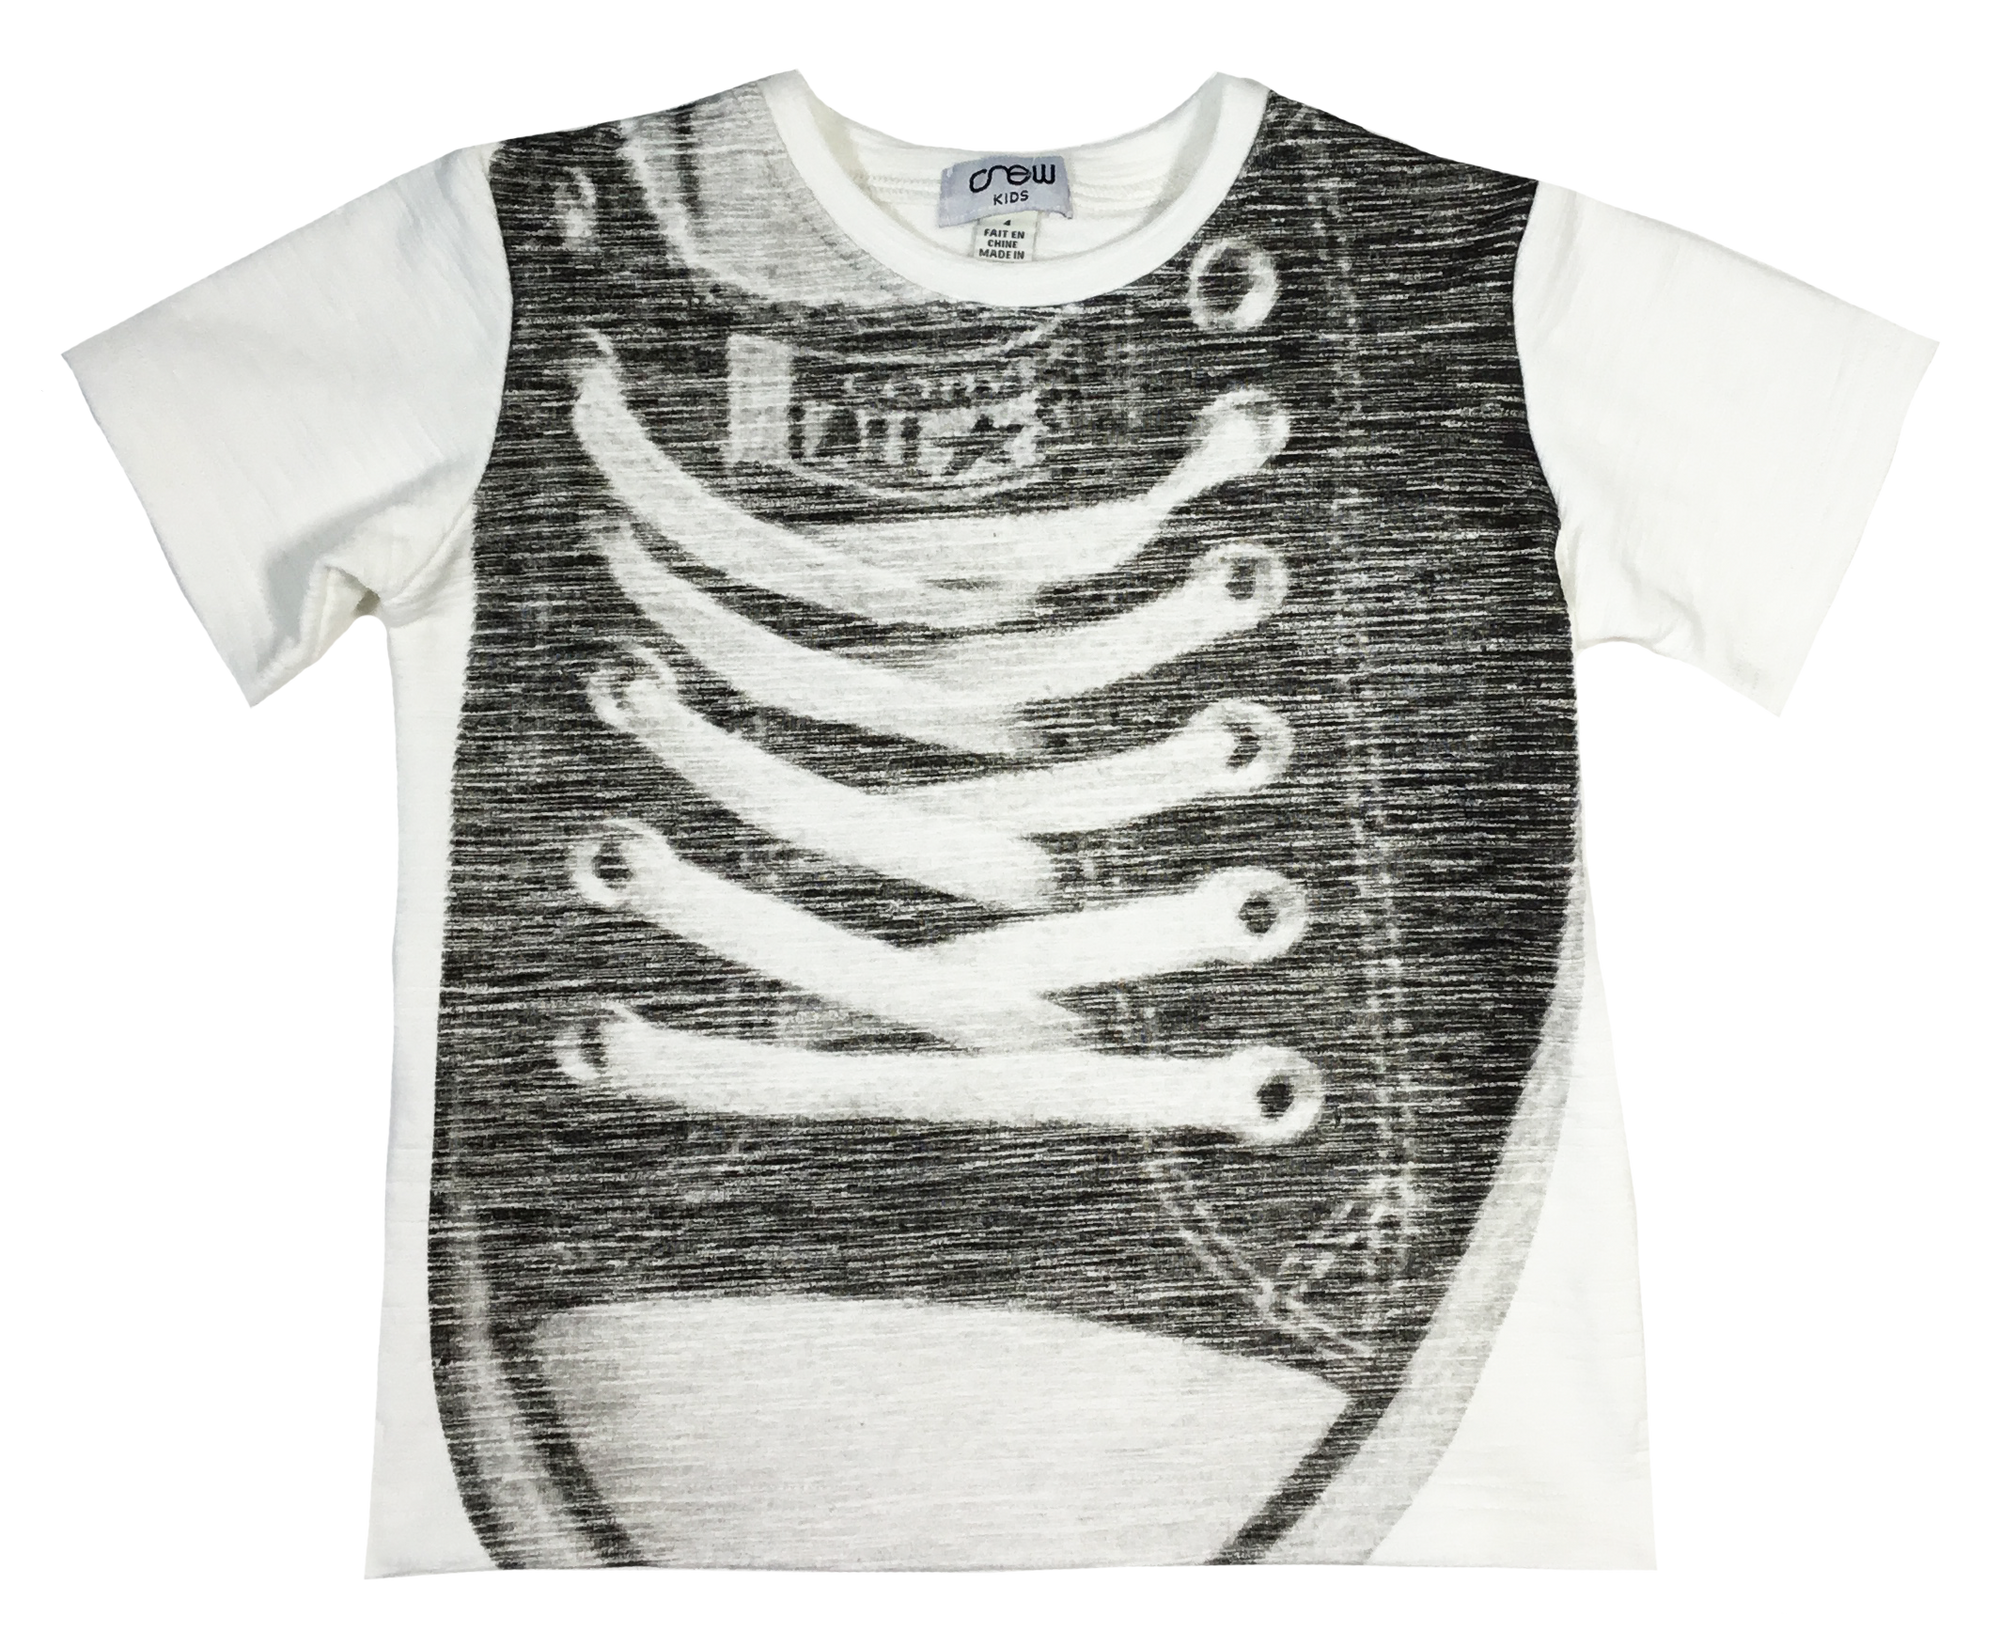 sneaker tees for toddlers